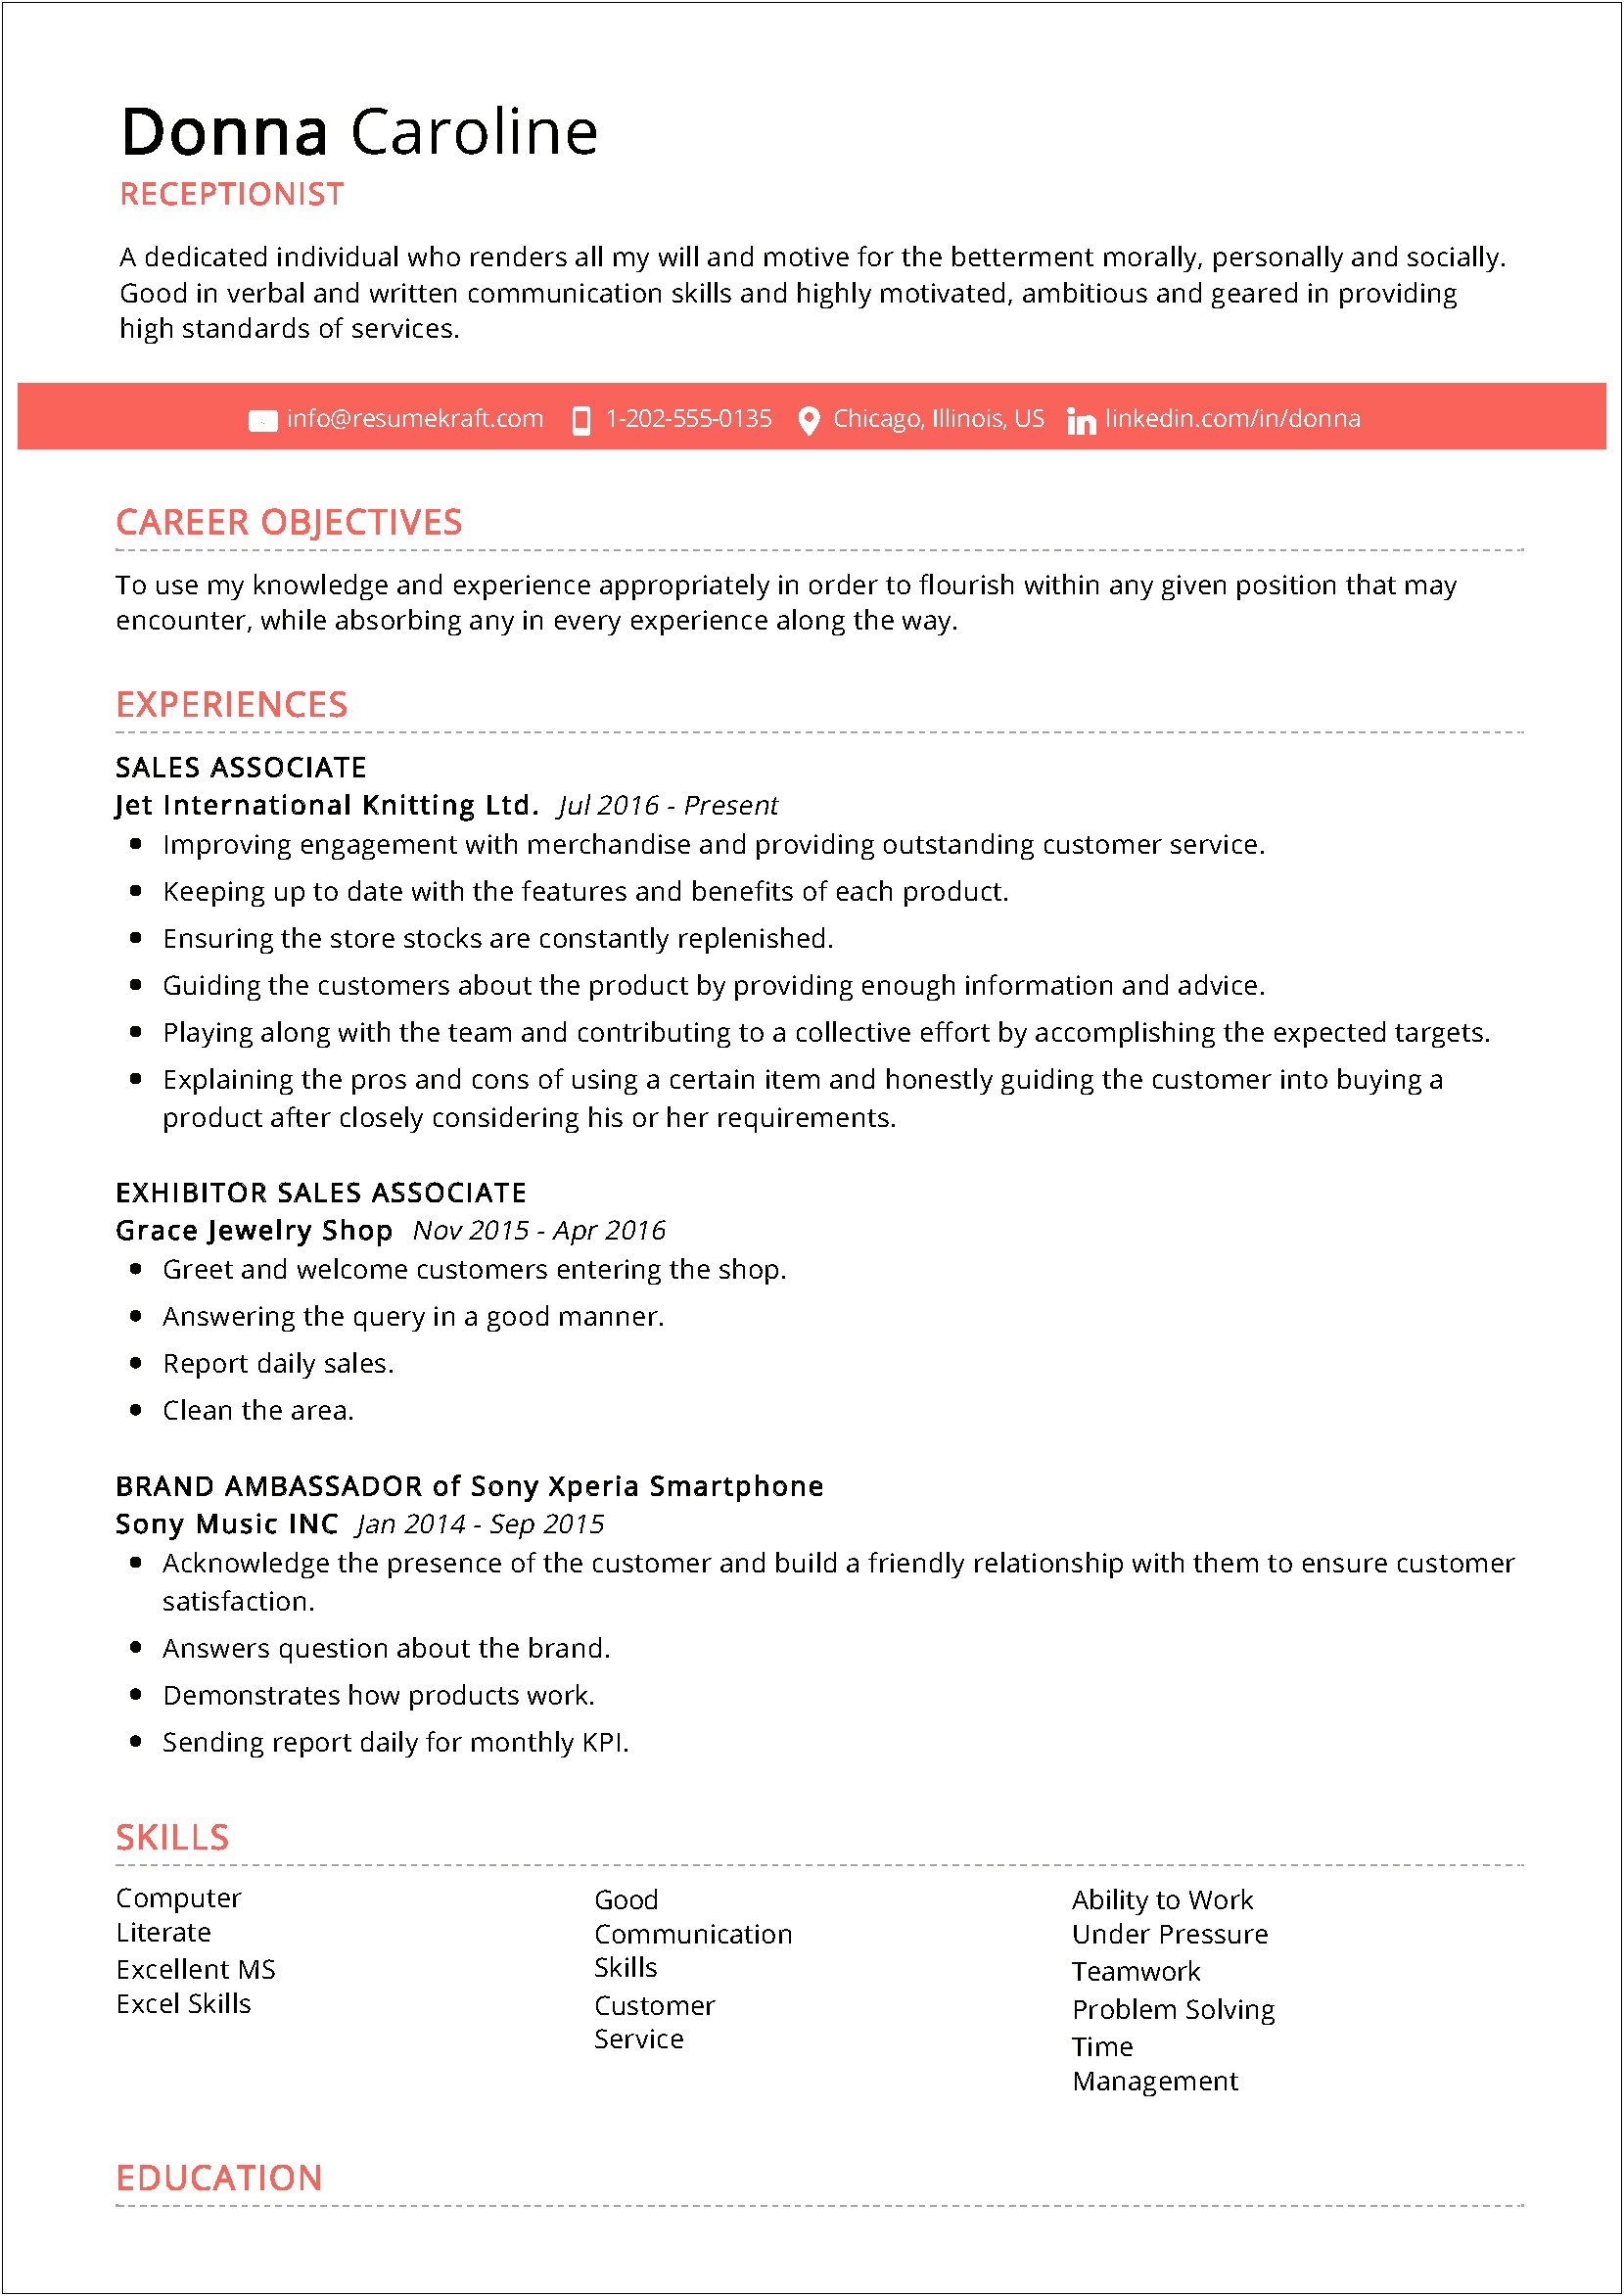 Resume Objective For A Receptionist Job